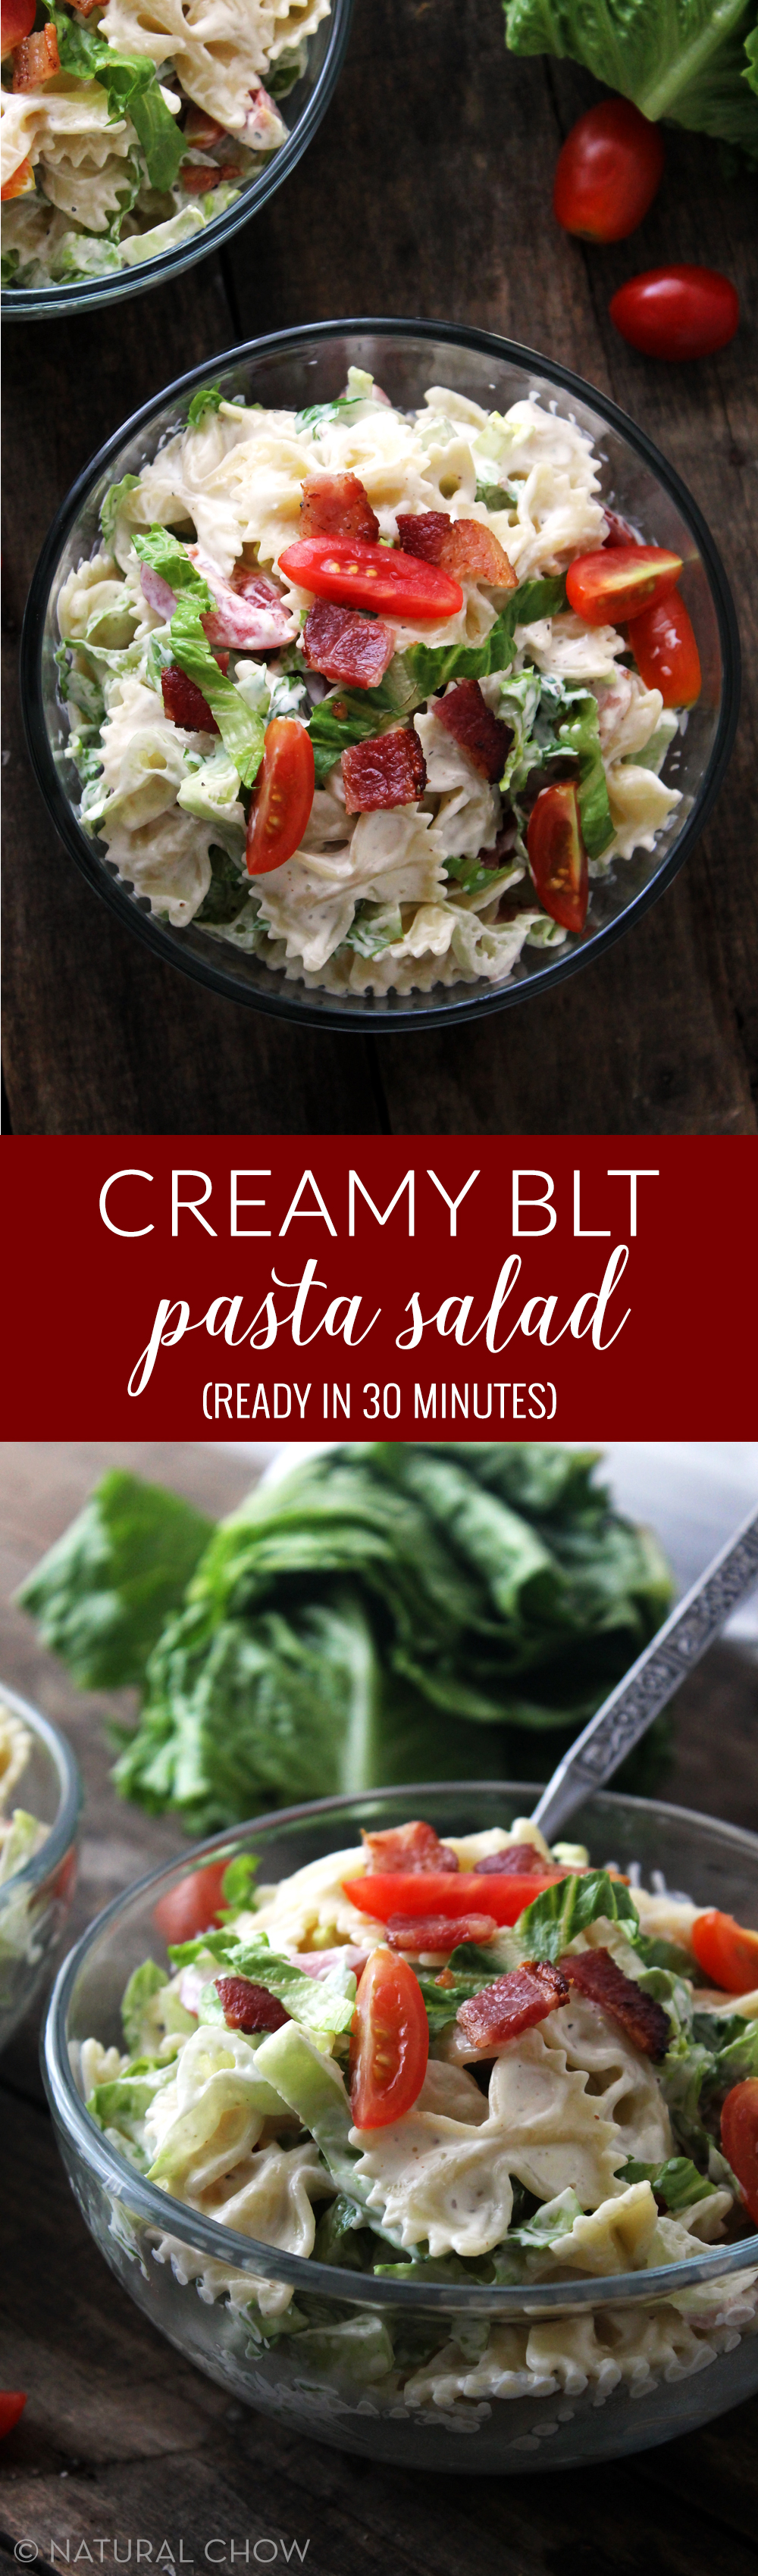 Light and creamy BLT pasta salad, ready in 30 minutes! Made with simple, fresh ingredients, every bite is packed with summery flavor.